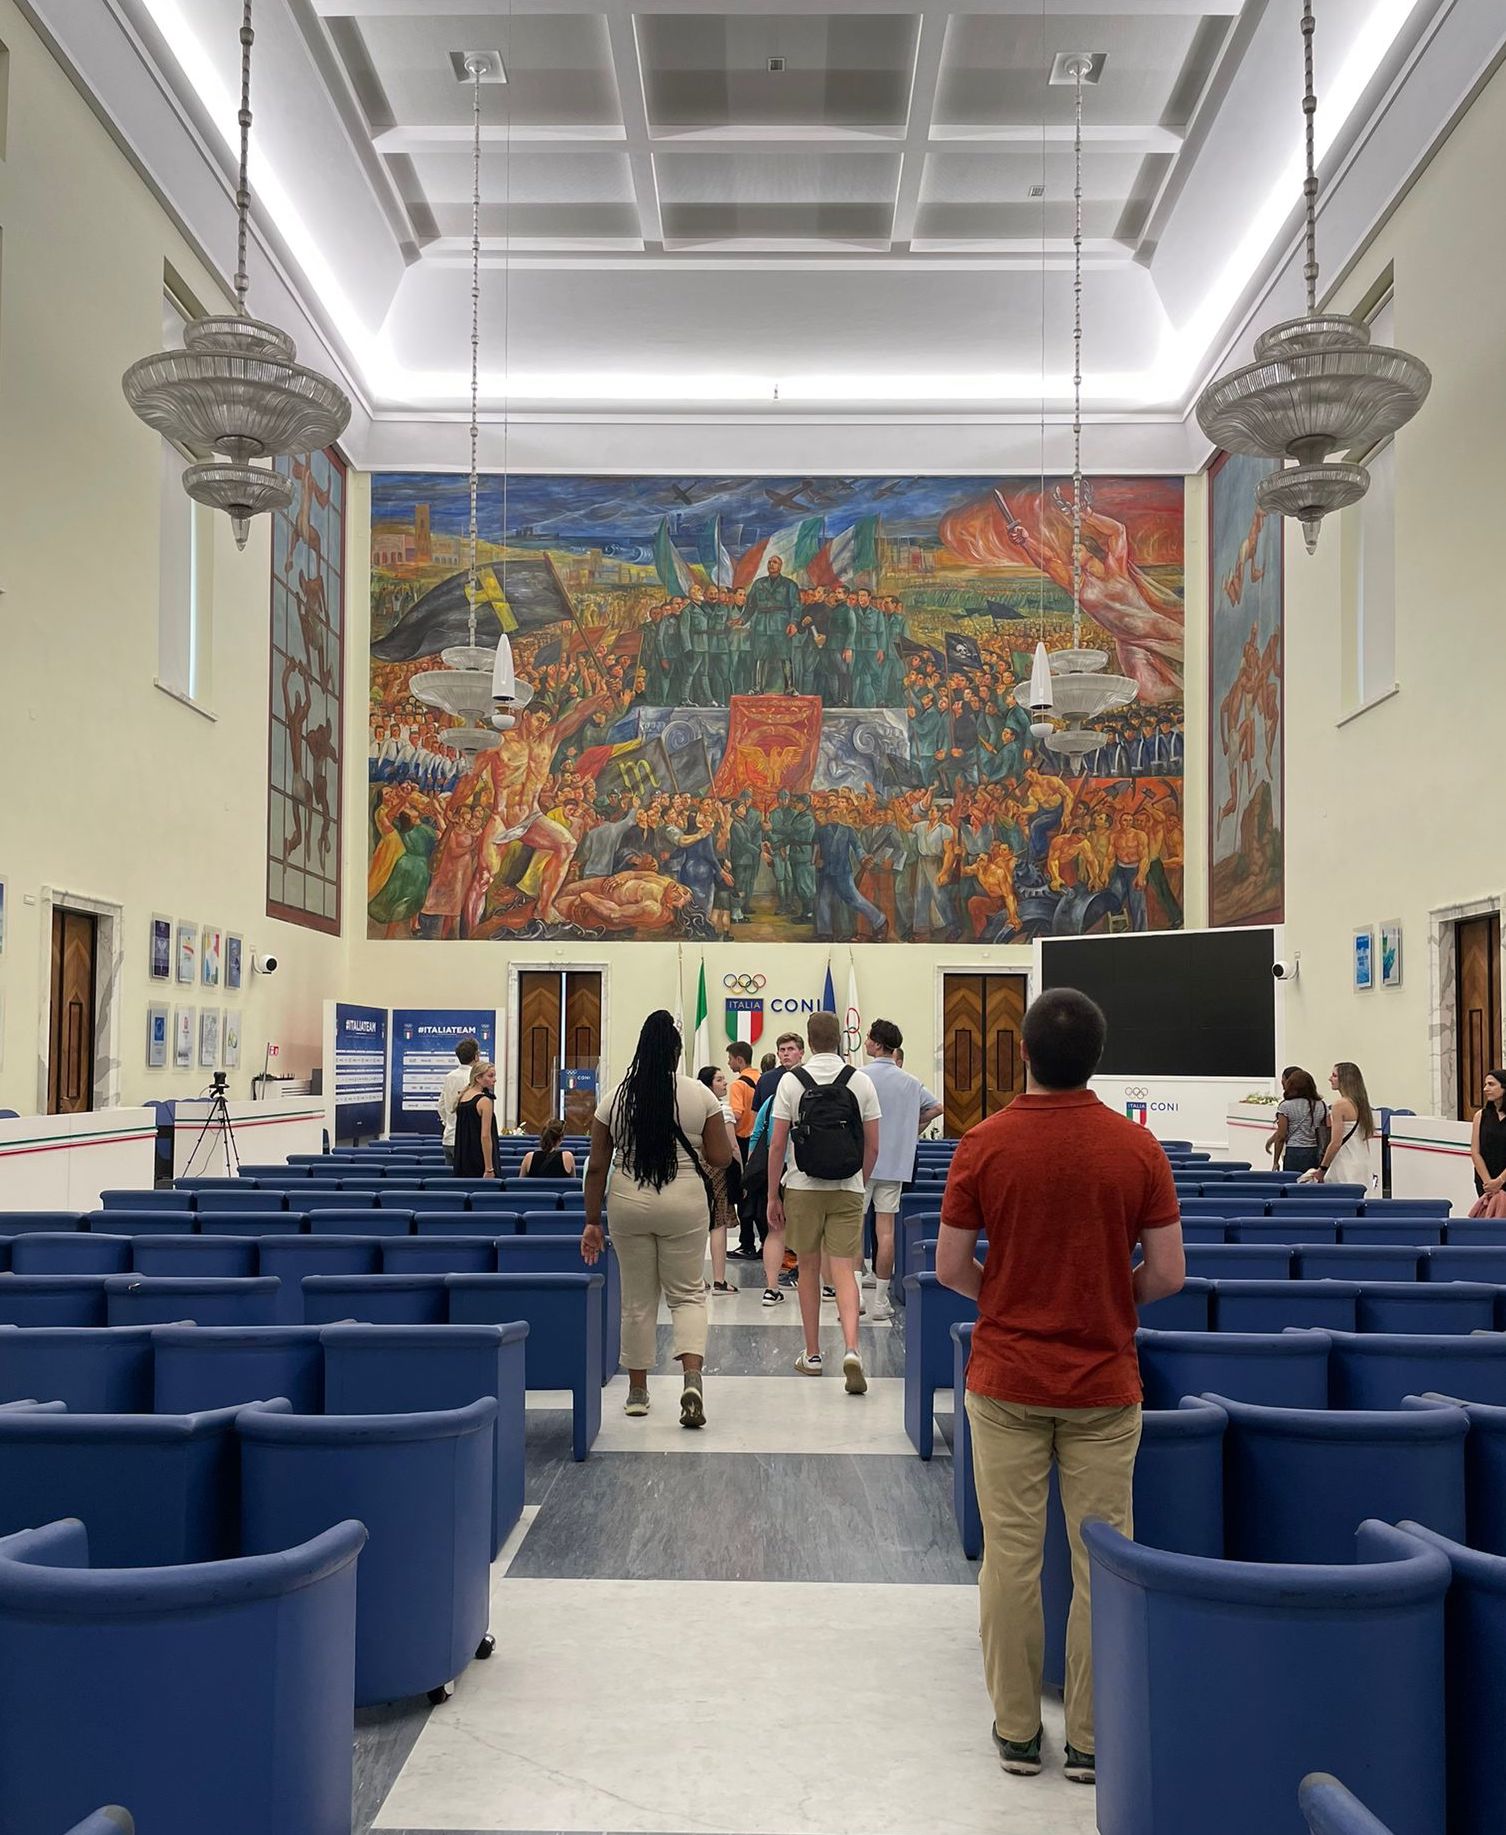 students enter mosaic-decorated swimming pools and the main representative room, in which official CONI press conferences take place